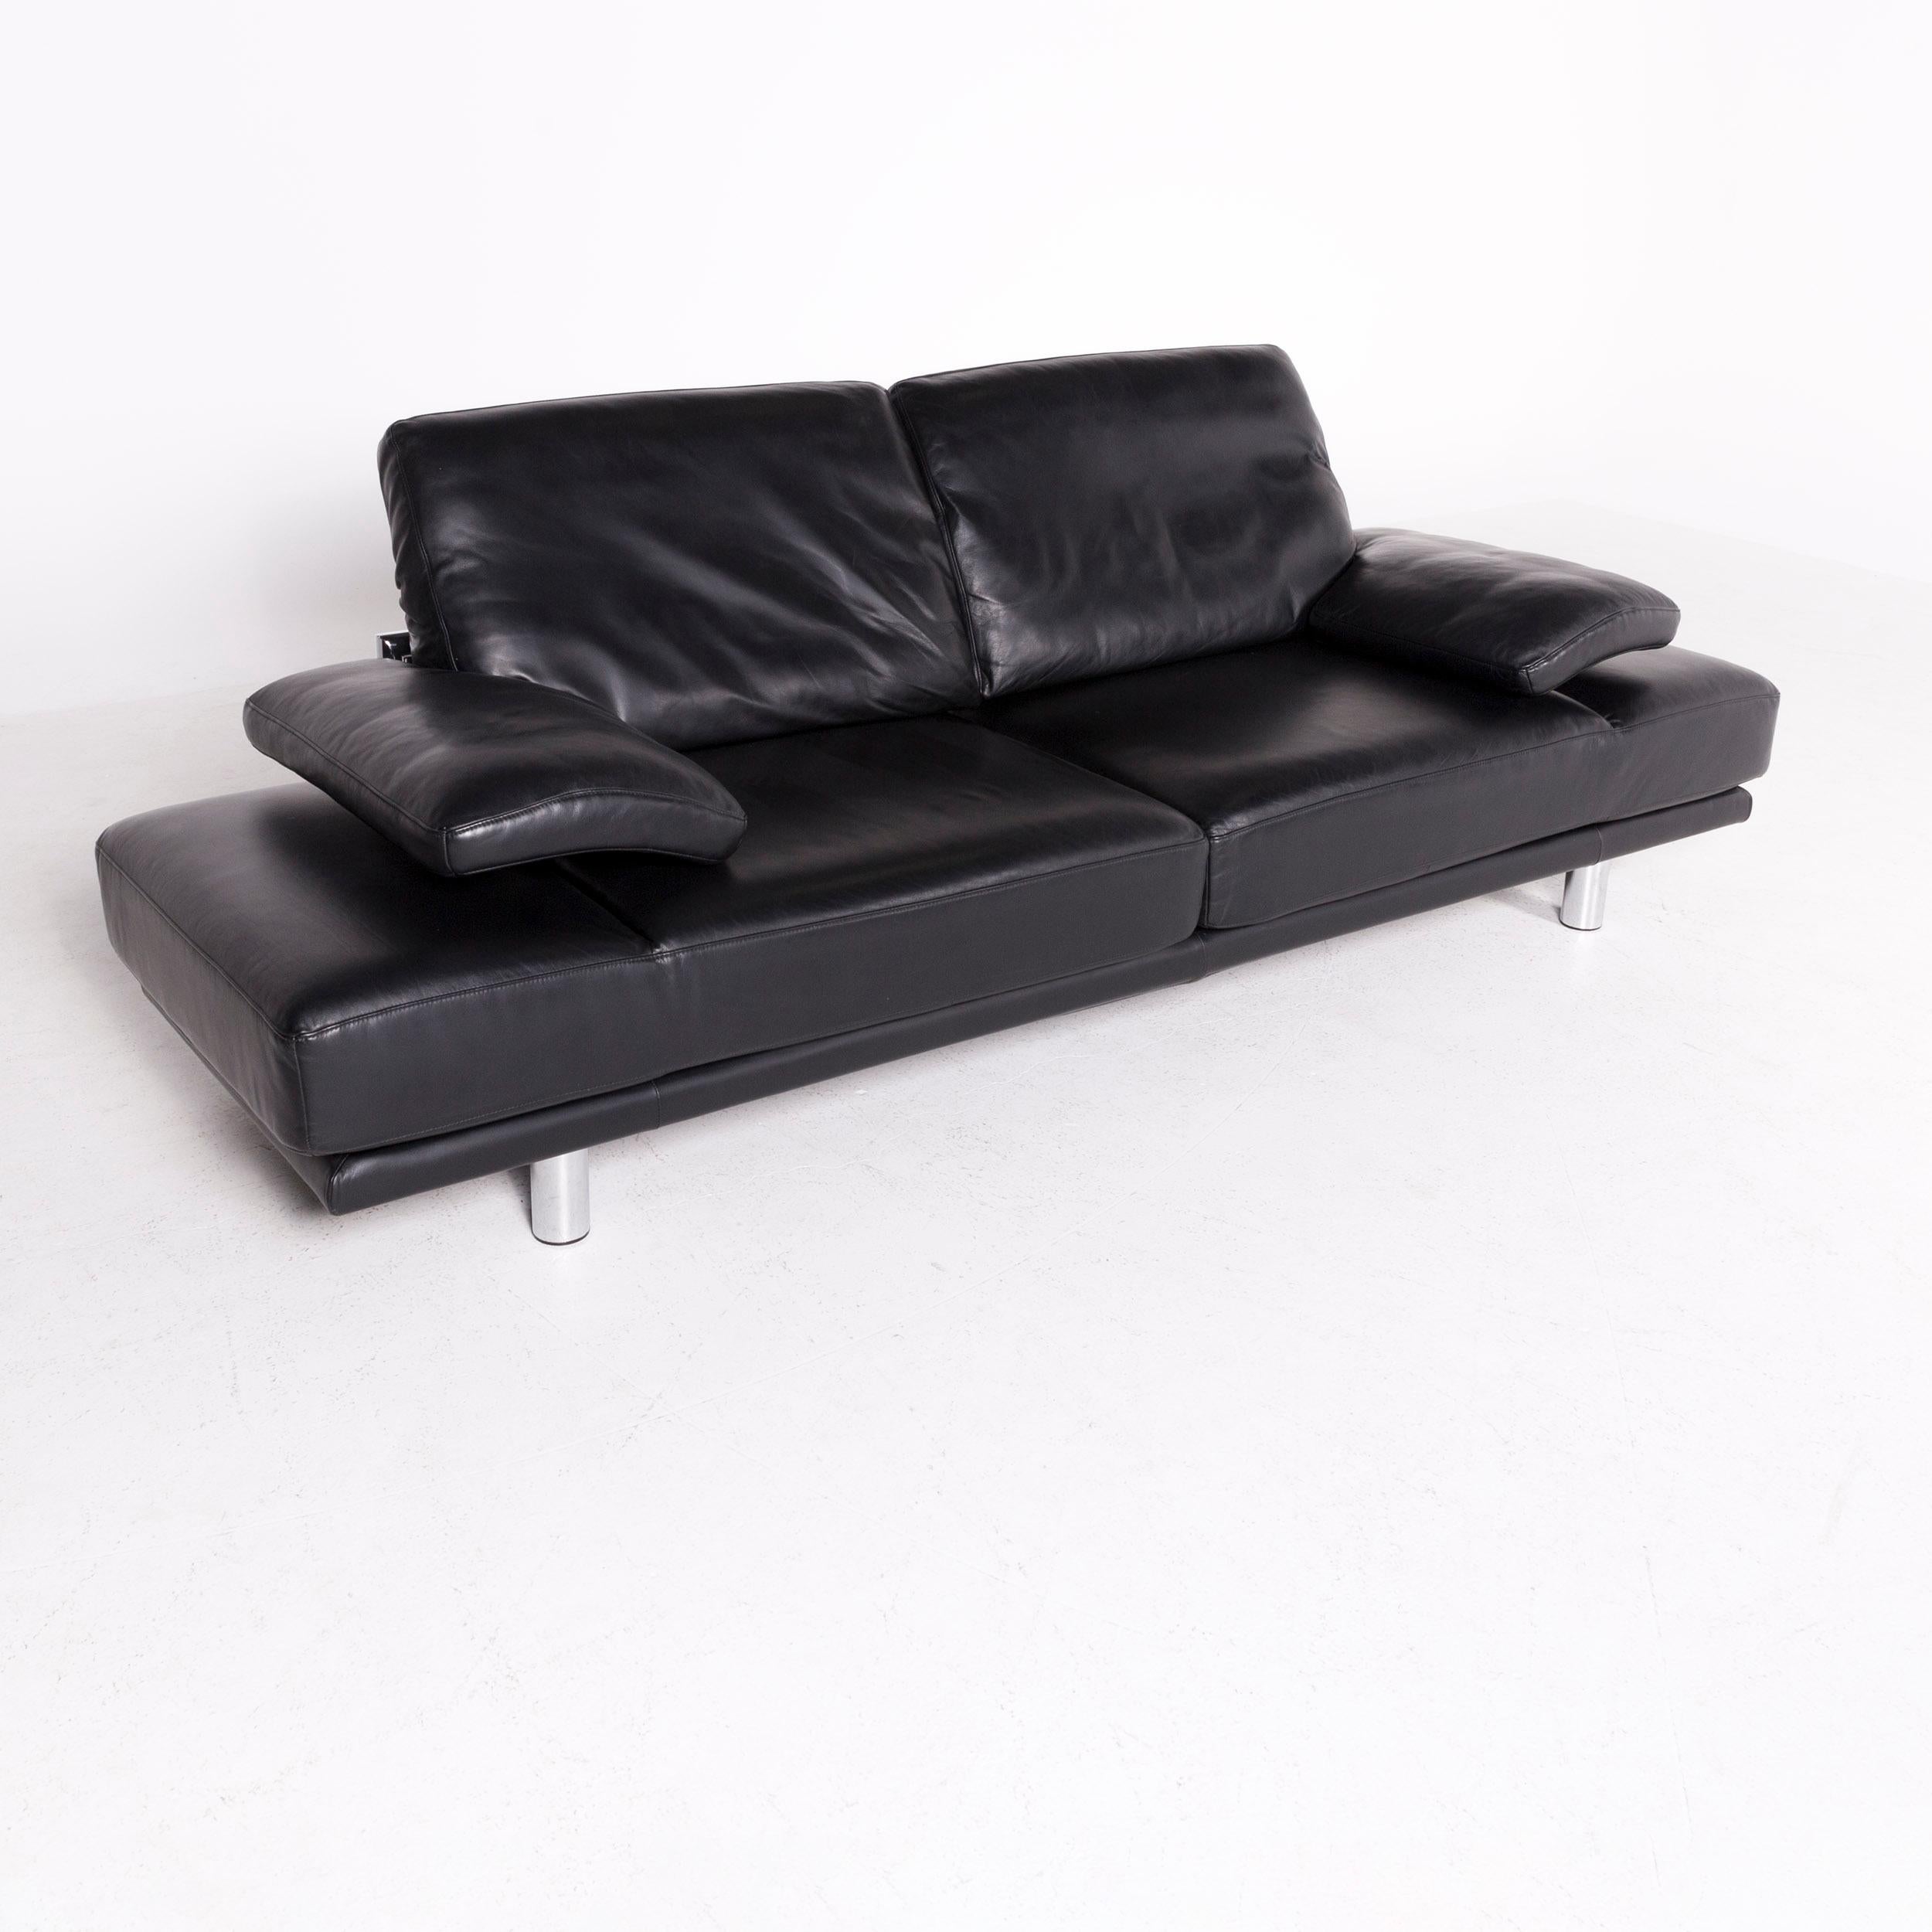 We bring to you a Rolf Benz 2400 designer leather sofa black genuine leather three-seat couch.

Product measurements in centimeters:

Depth 93
Width 260
Height 89
Seat-height 44
Rest-height 59
Seat-depth 53
Seat-width 136
Back-height